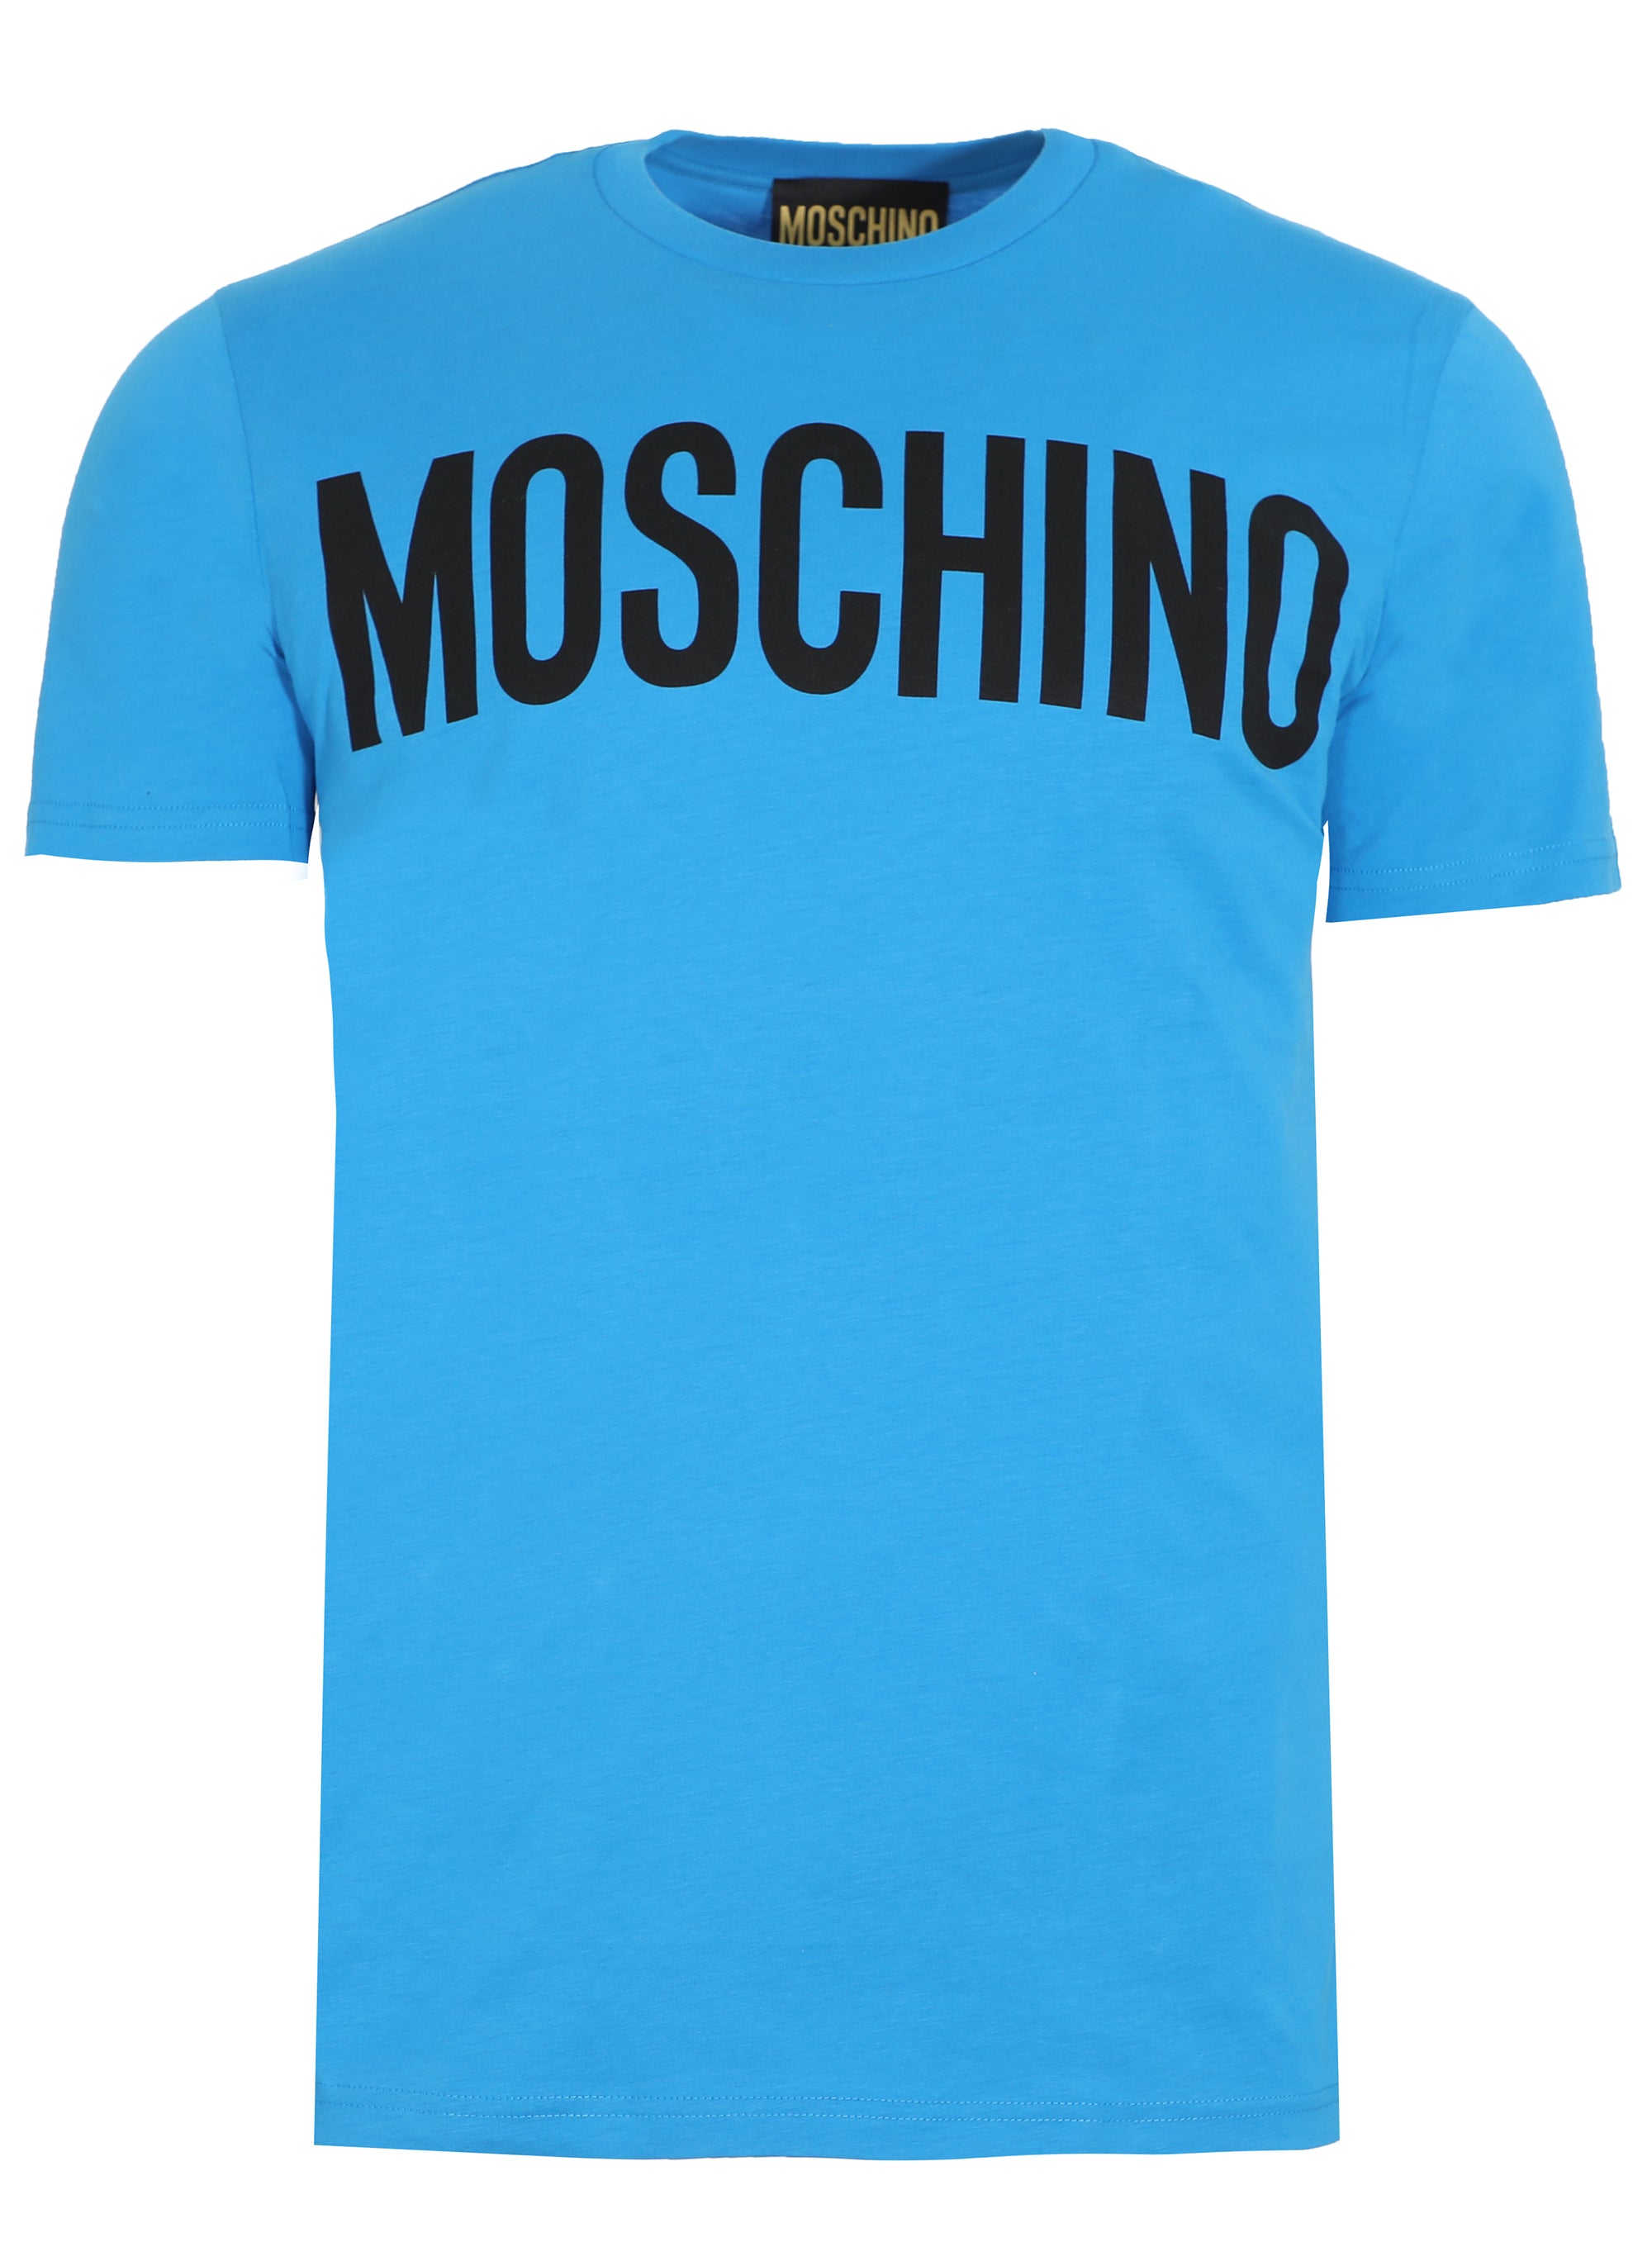 STRETCH JERSEY T-SHIRT WITH LOGO - BLUE